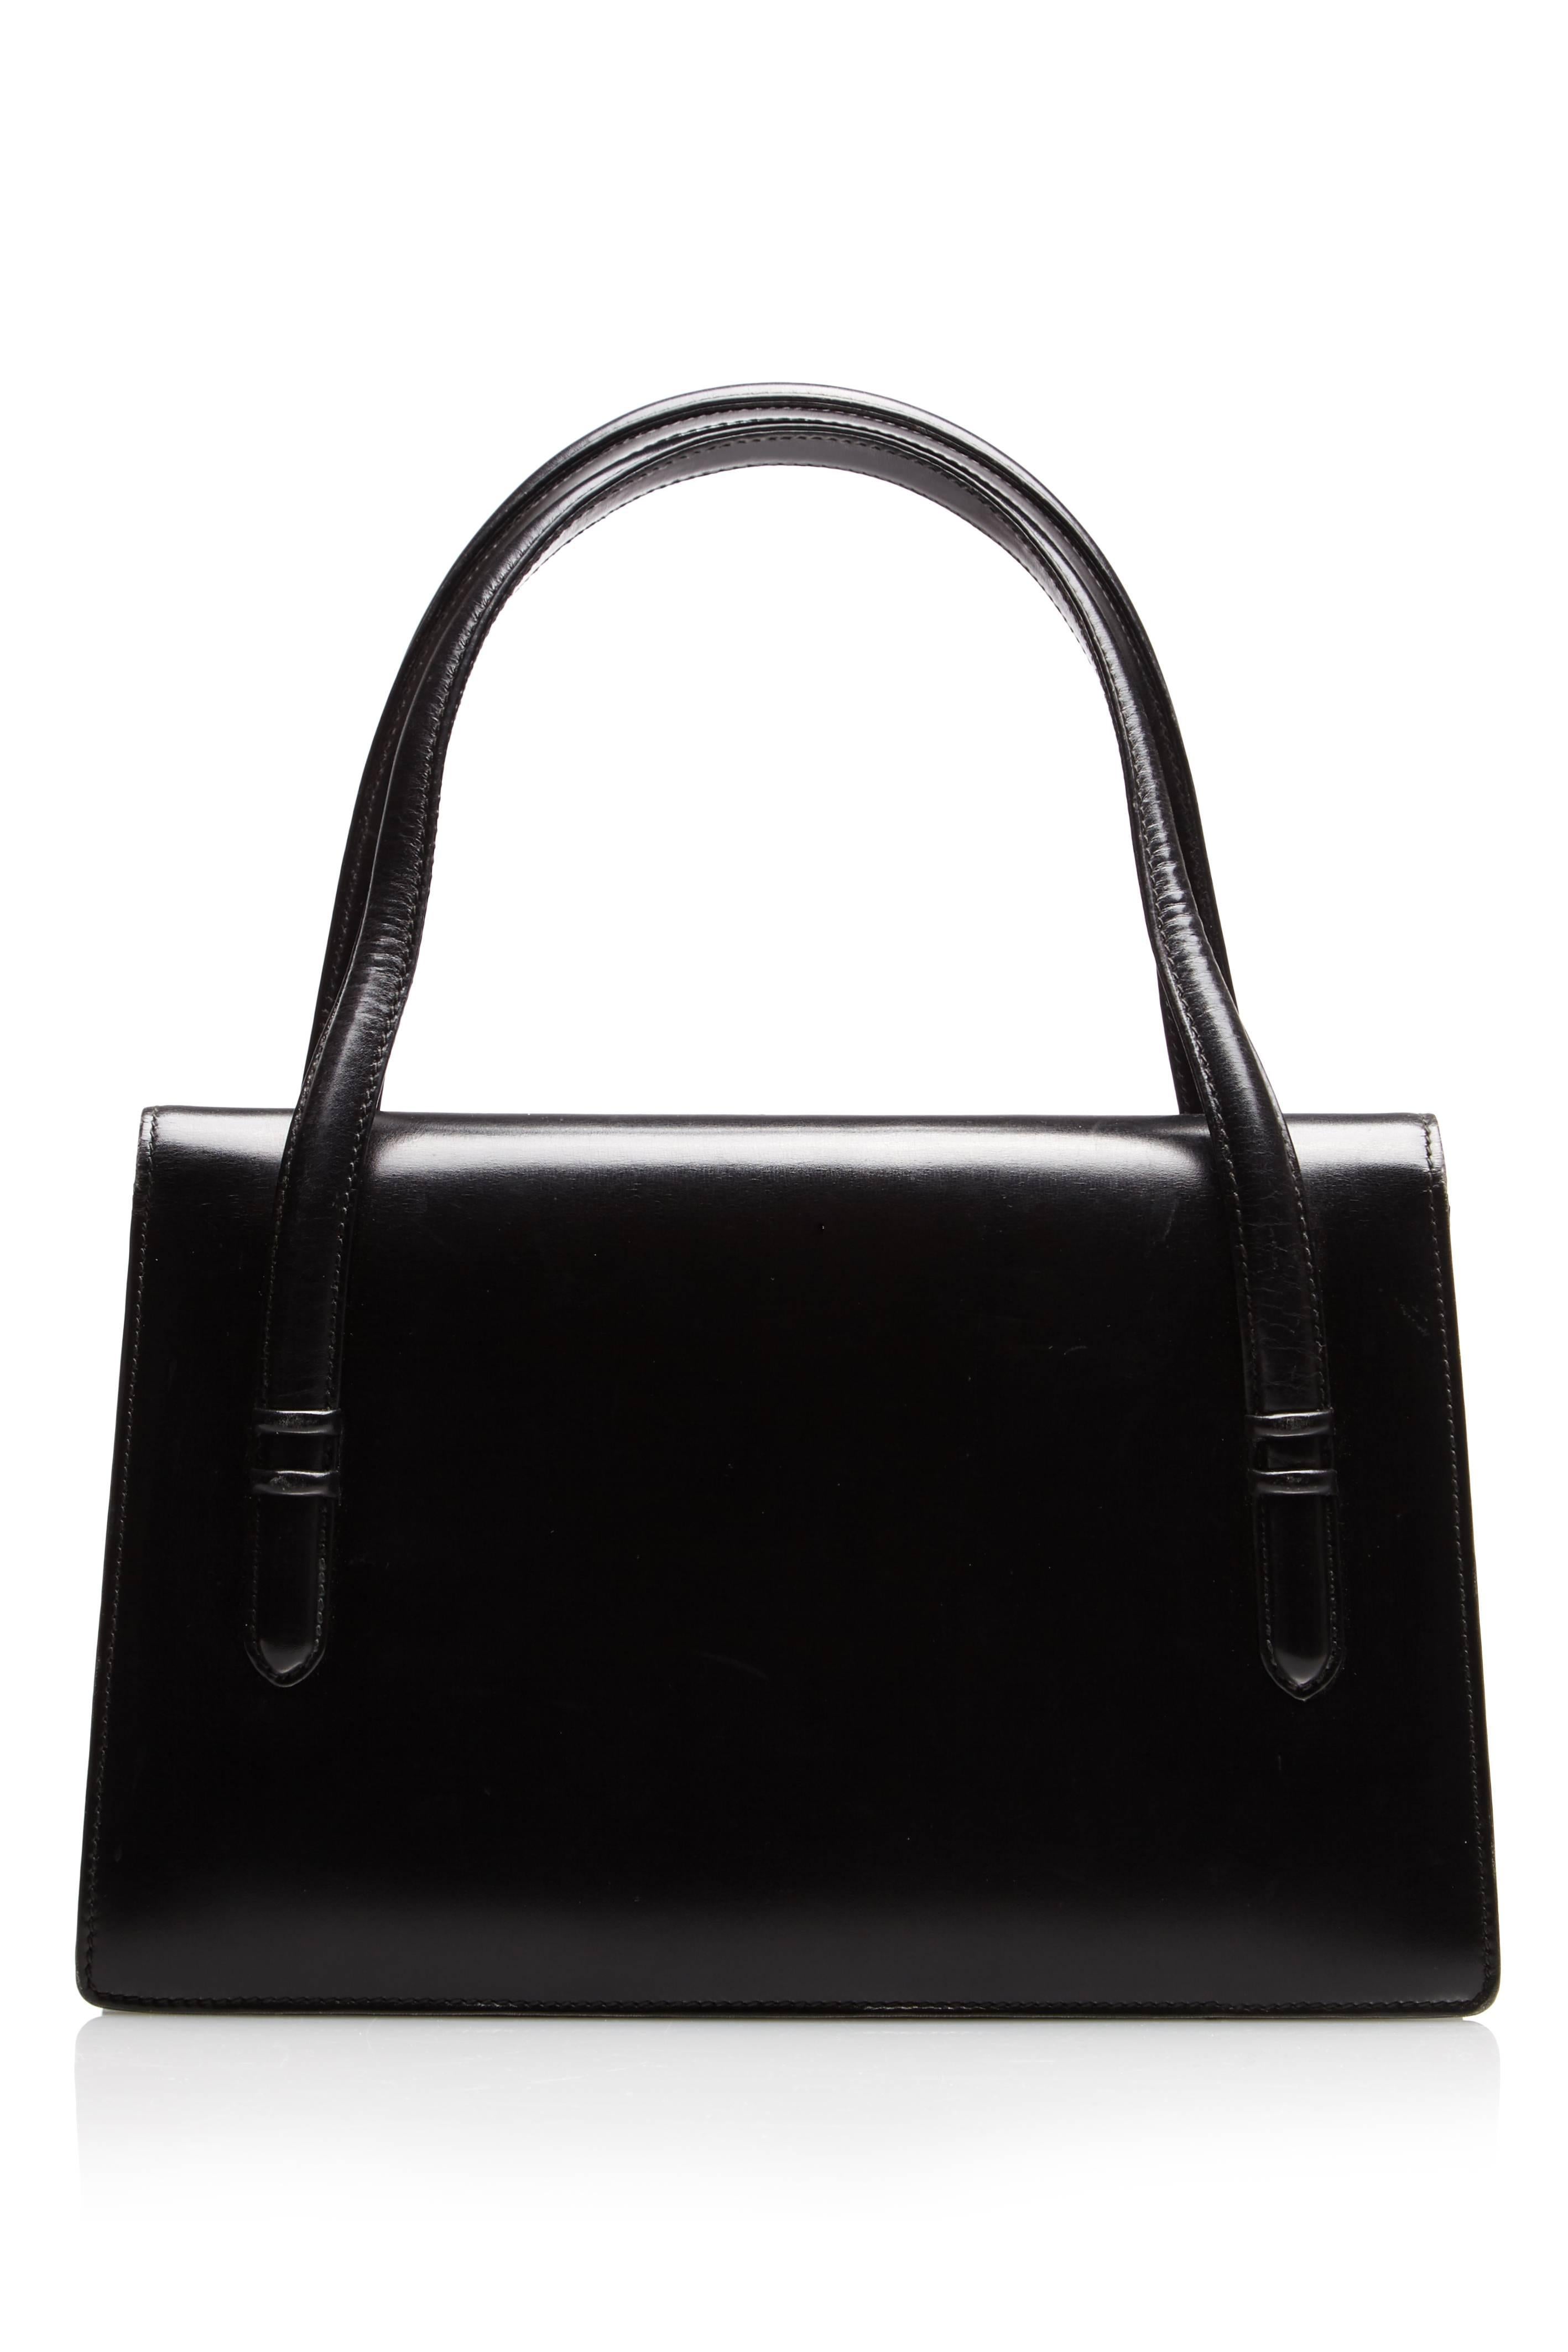 Vintage 1960s black leather handbag by Gucci. This piece has two strap handles,  a gold flip closure and comes with a dust bag. Inside there are two main compartments with a further two pockets inside the back compartment, one with a zip to fasten.